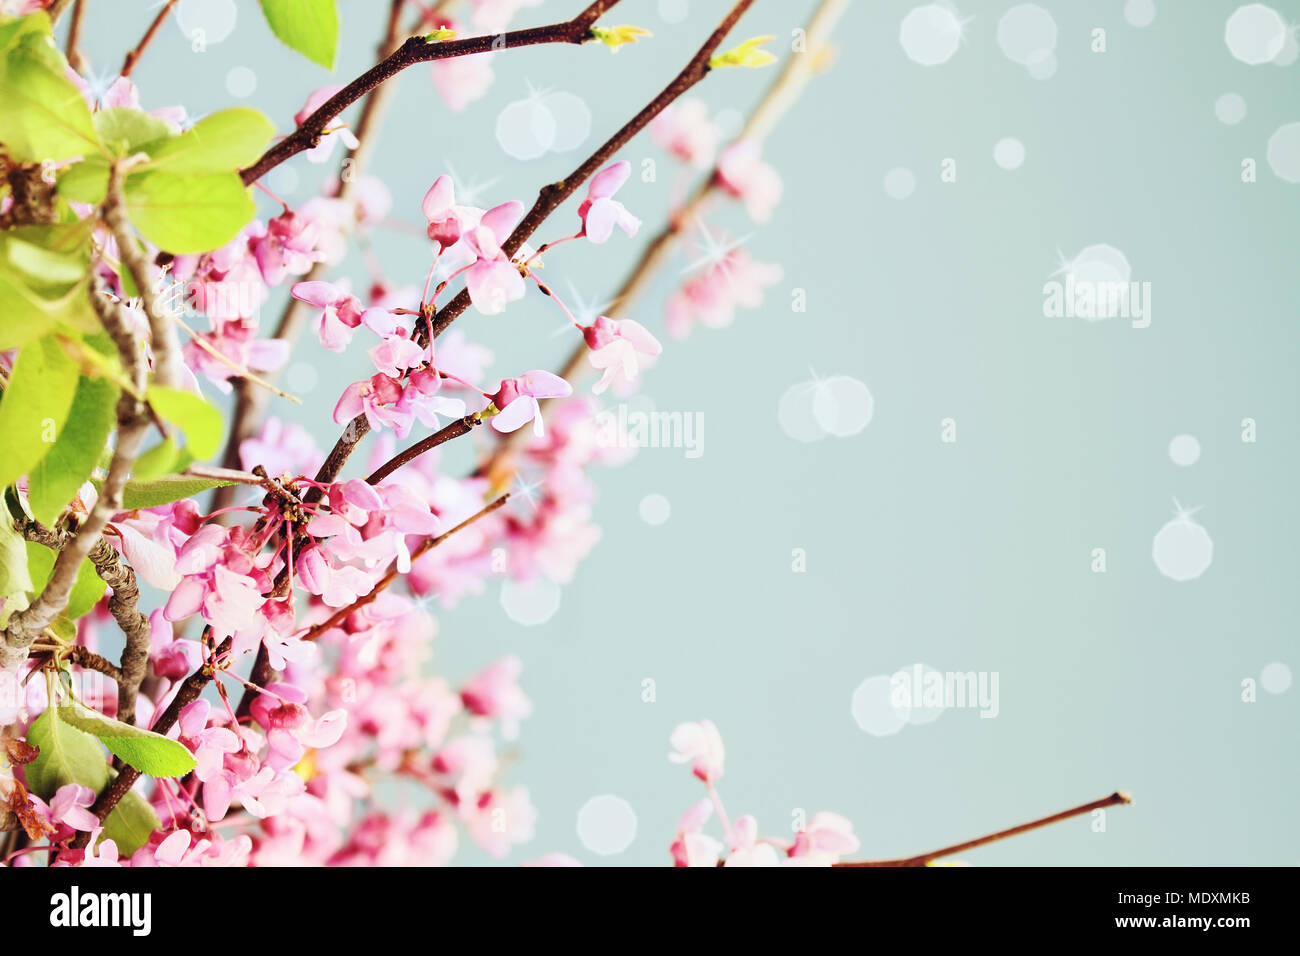 Delicate Redbud Blossoms against a blue background. Extreme shallow depth of field. Stock Photo